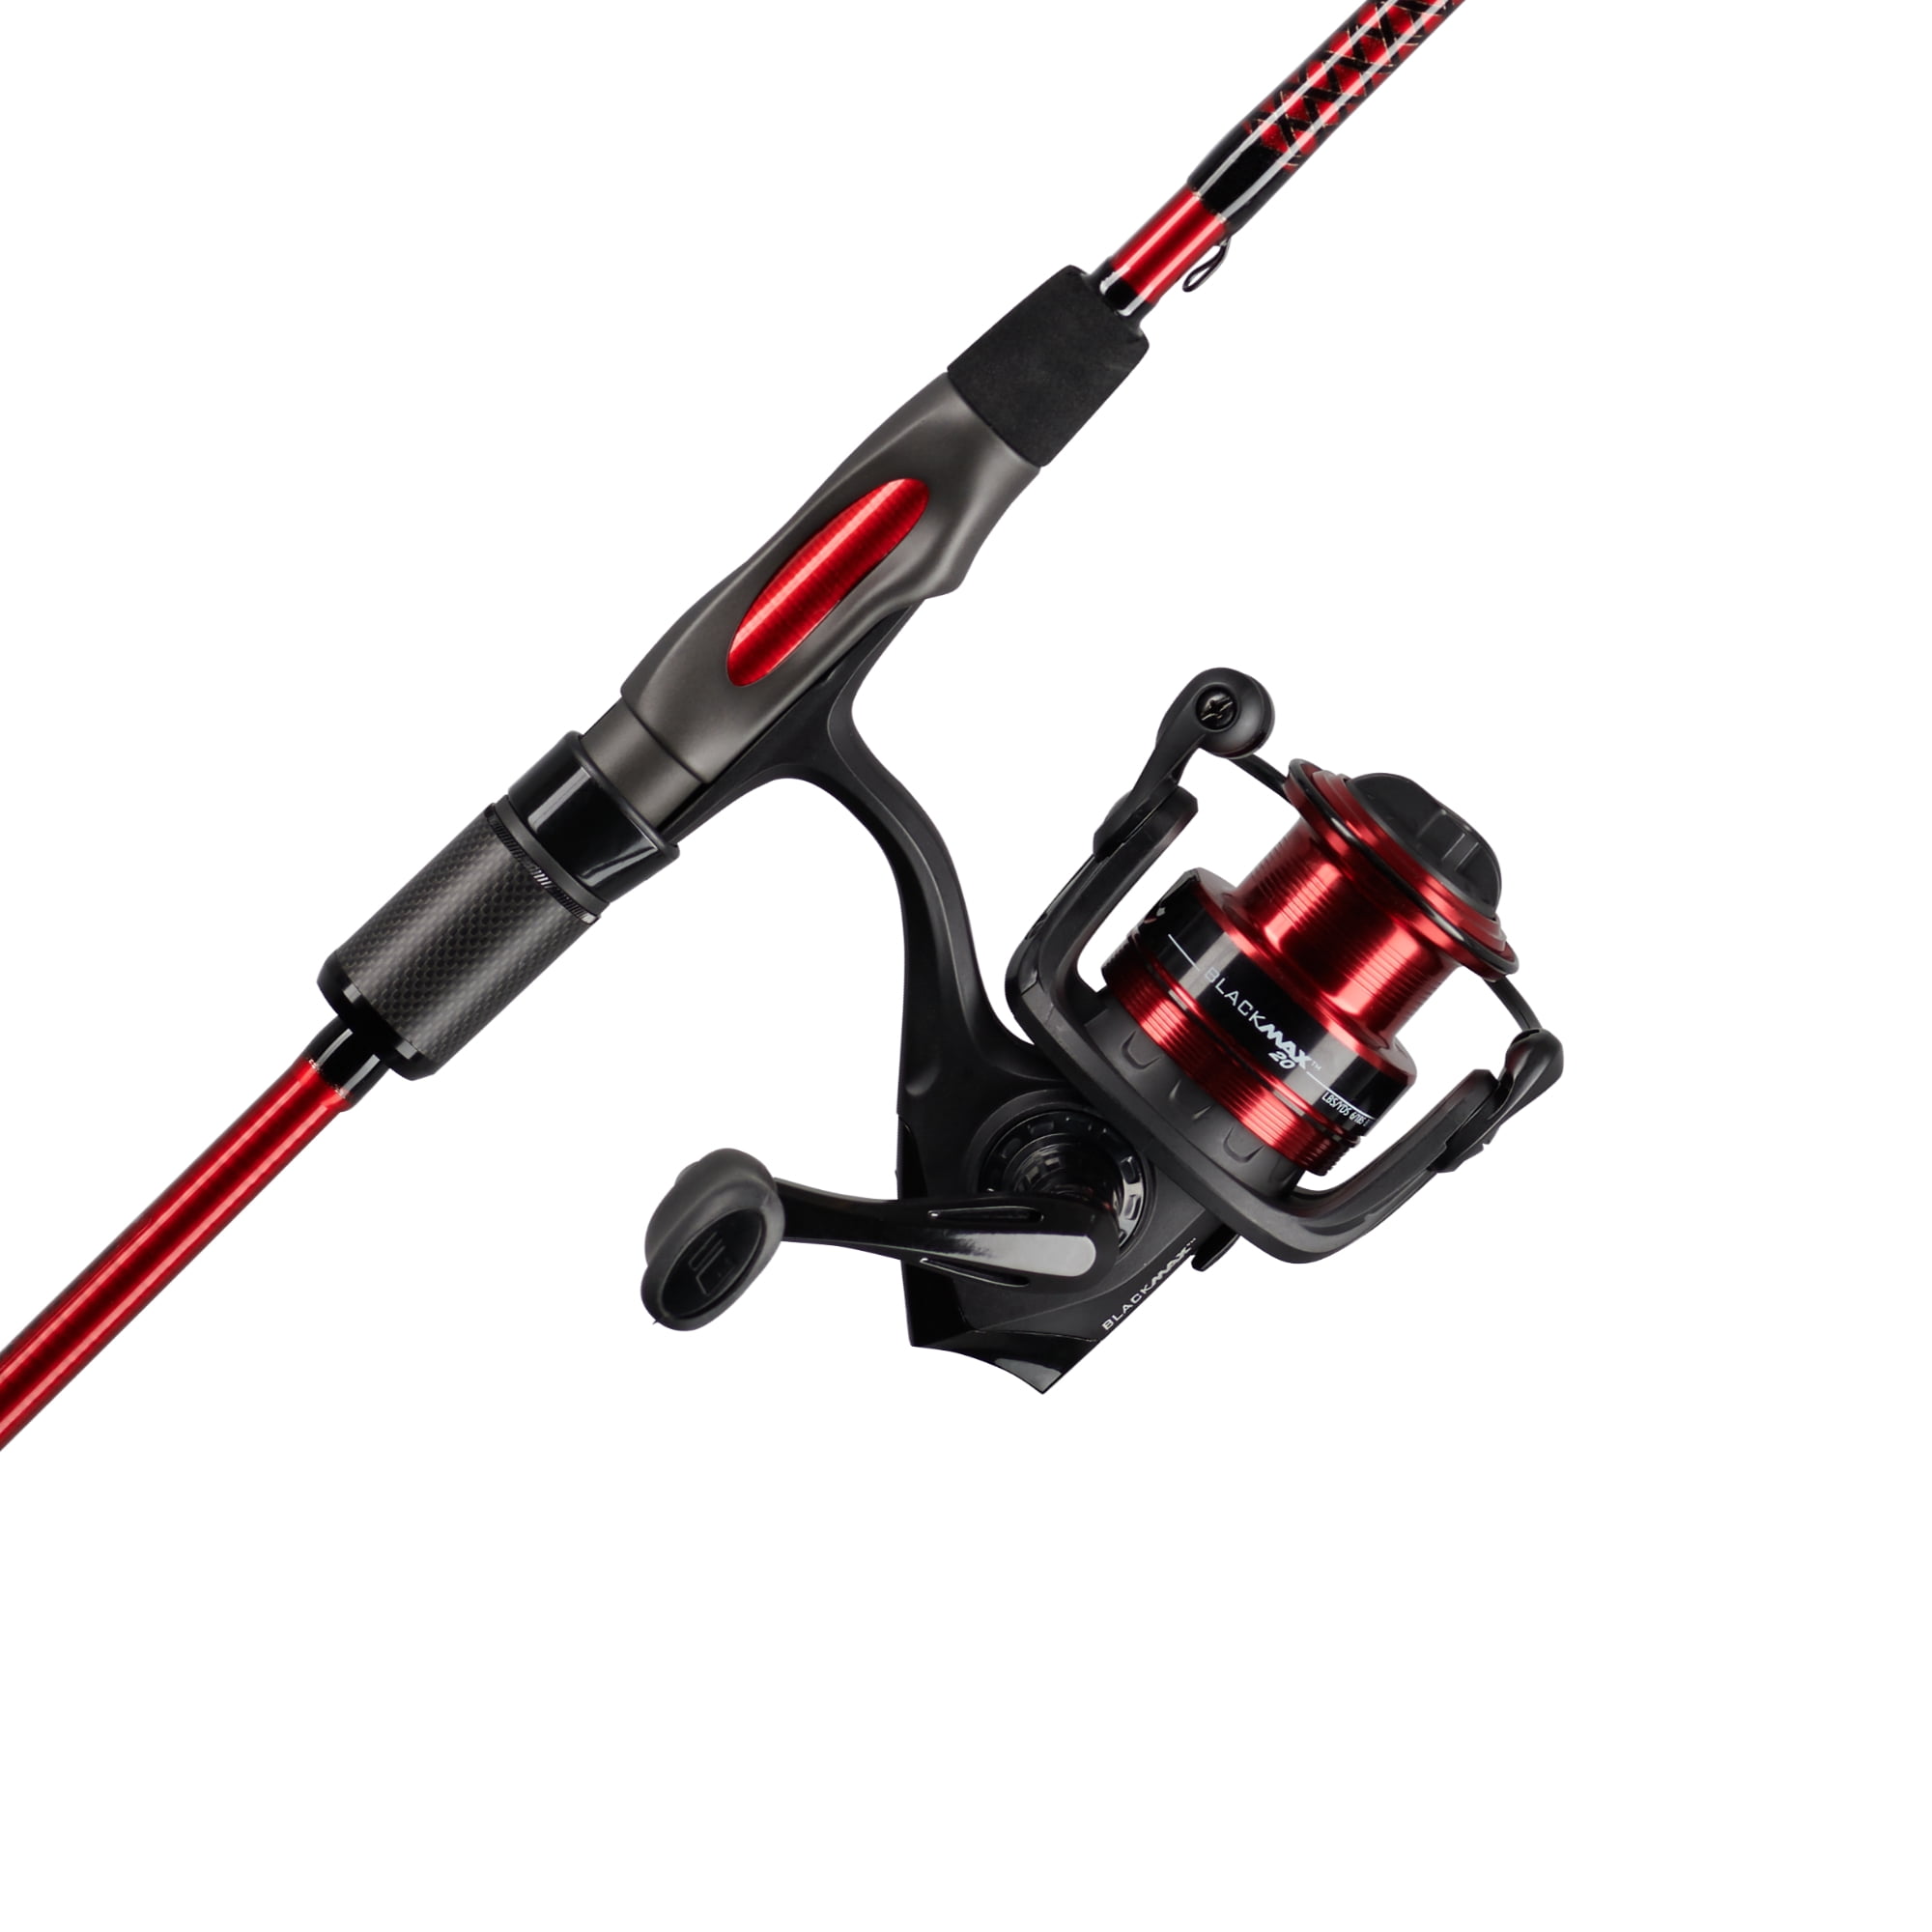 Ugly Stik 6'6” Carbon Spinning Fishing Rod and Reel Spinning Combo -  Walmart.com